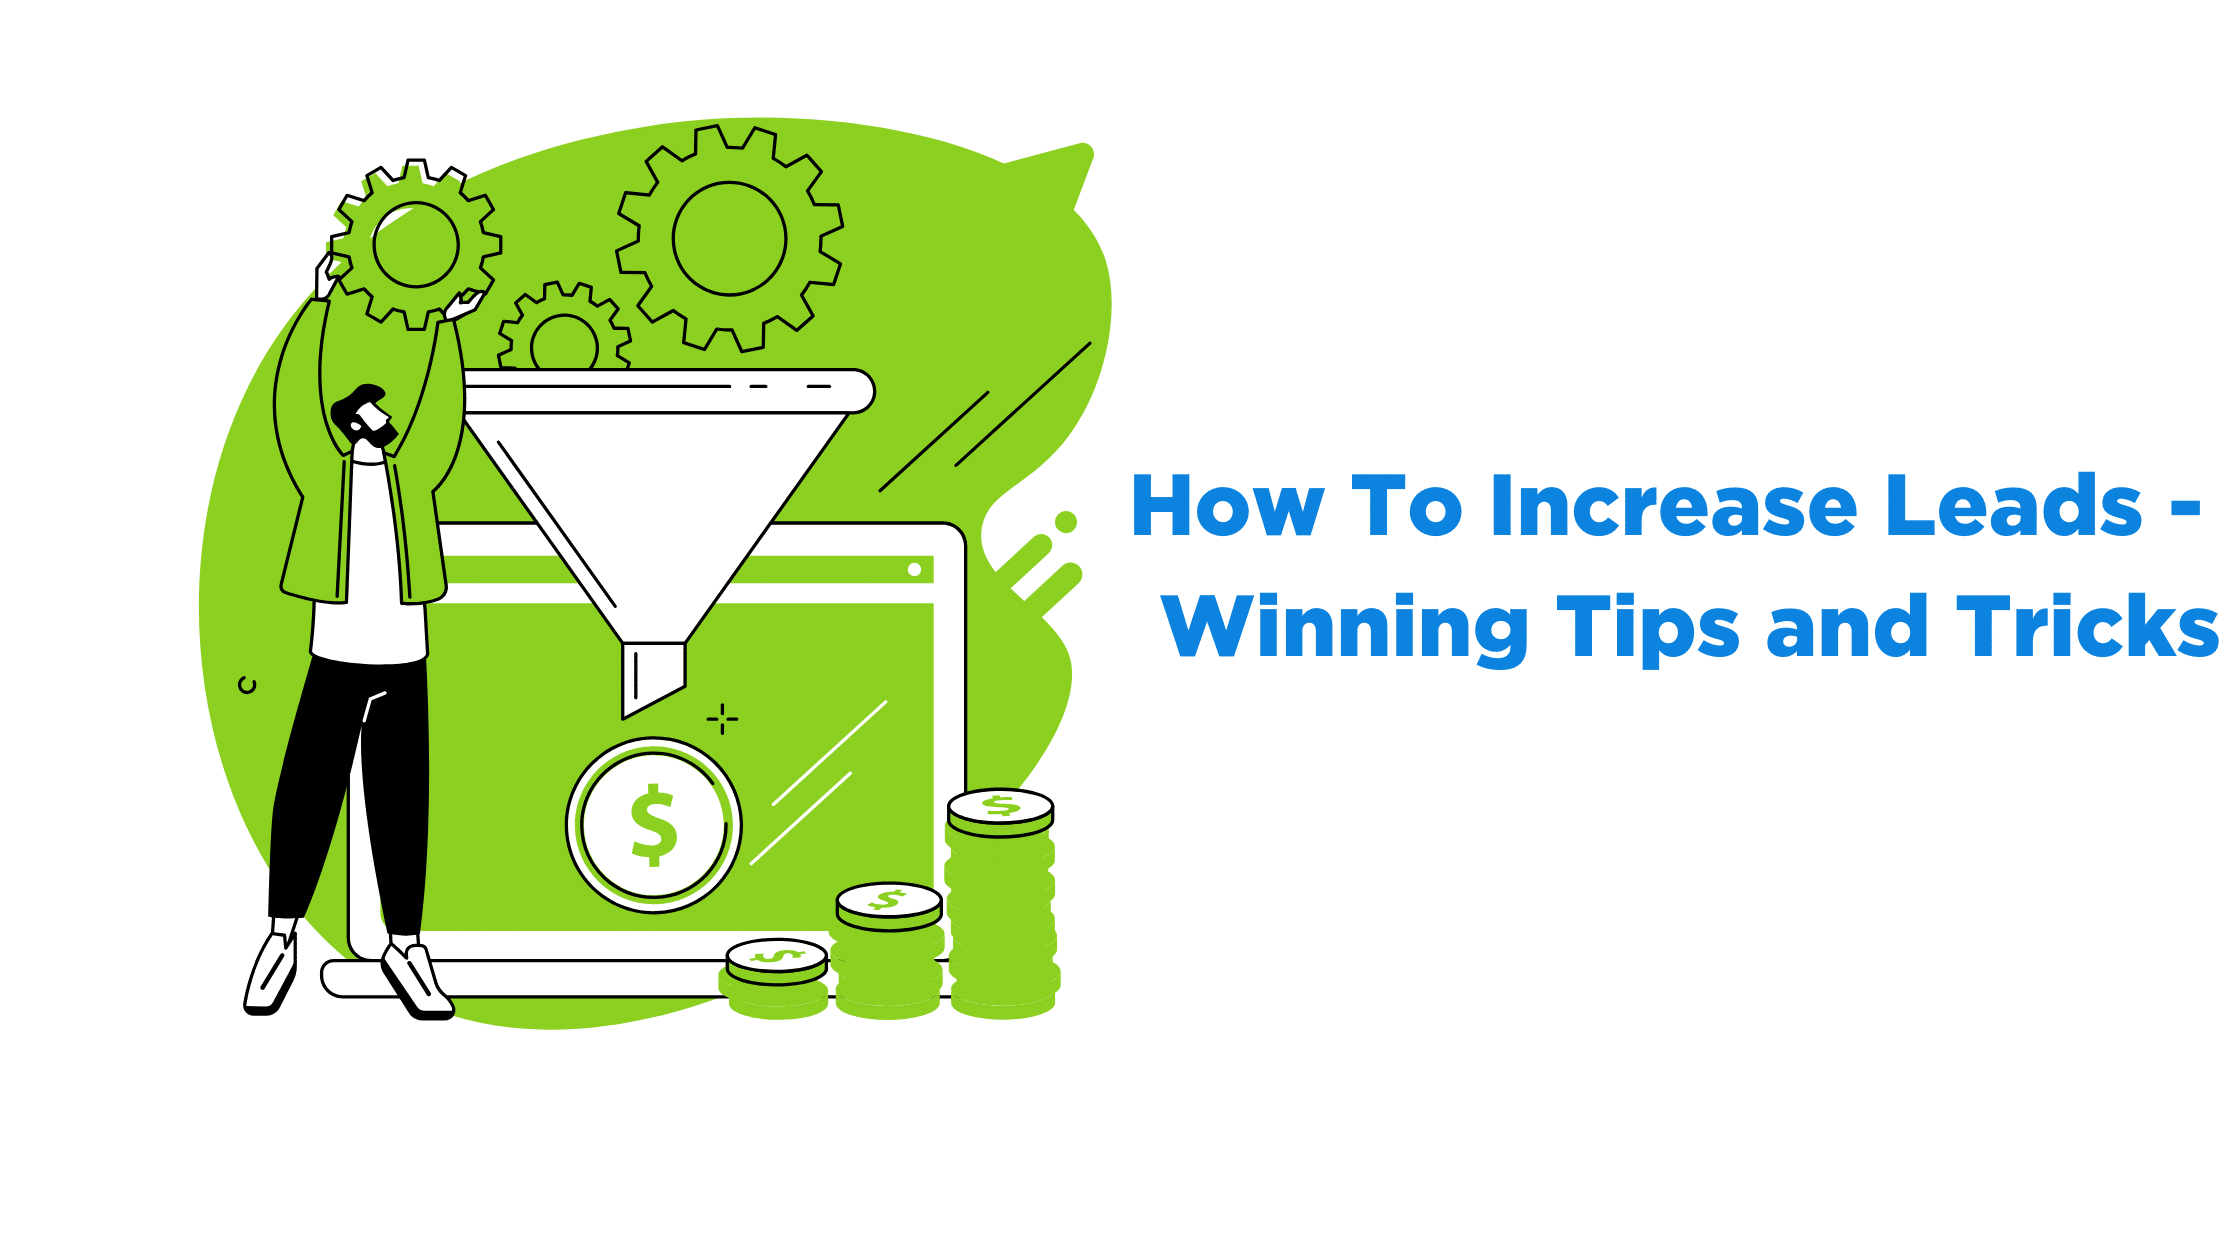 How To Increase Leads - Winning Tips and Tricks